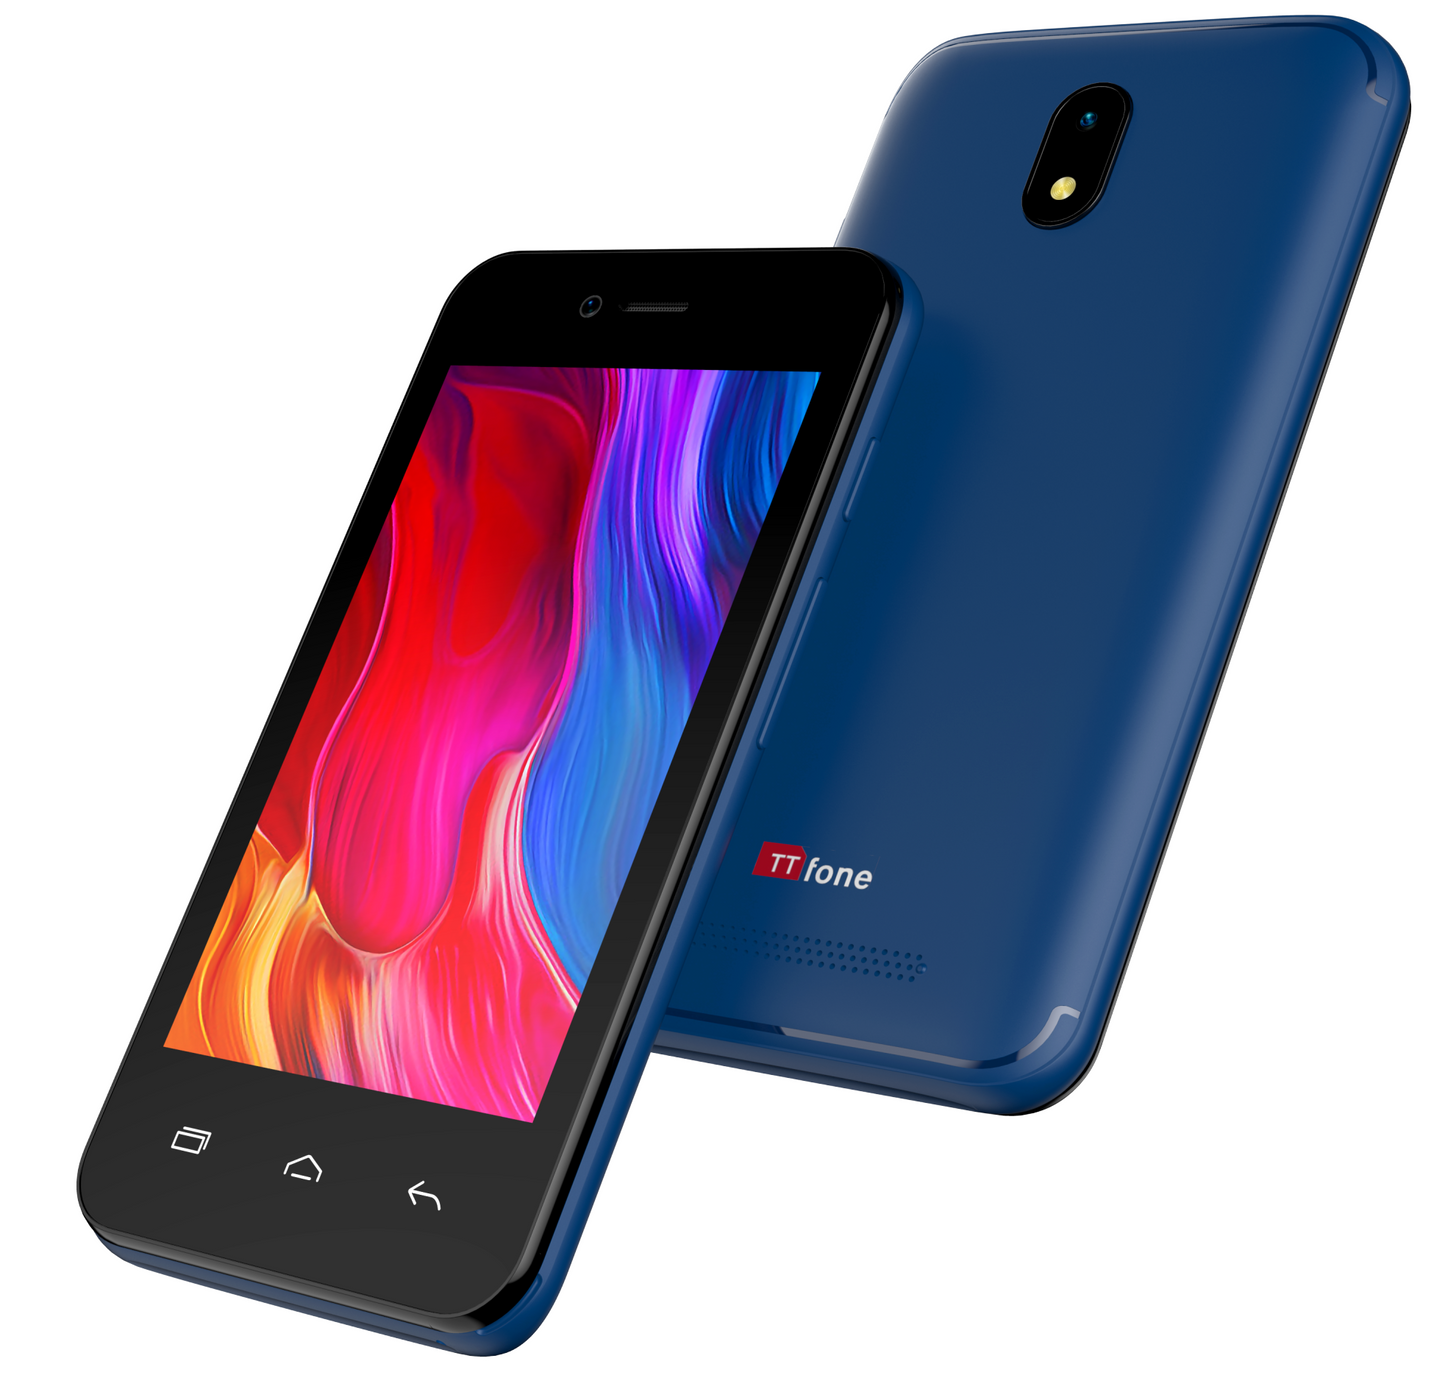 TTfone Blue TT20 Dual SIM - Warehouse Deals with USB Cable and Giff Gaff Pay As You Go Sim Card